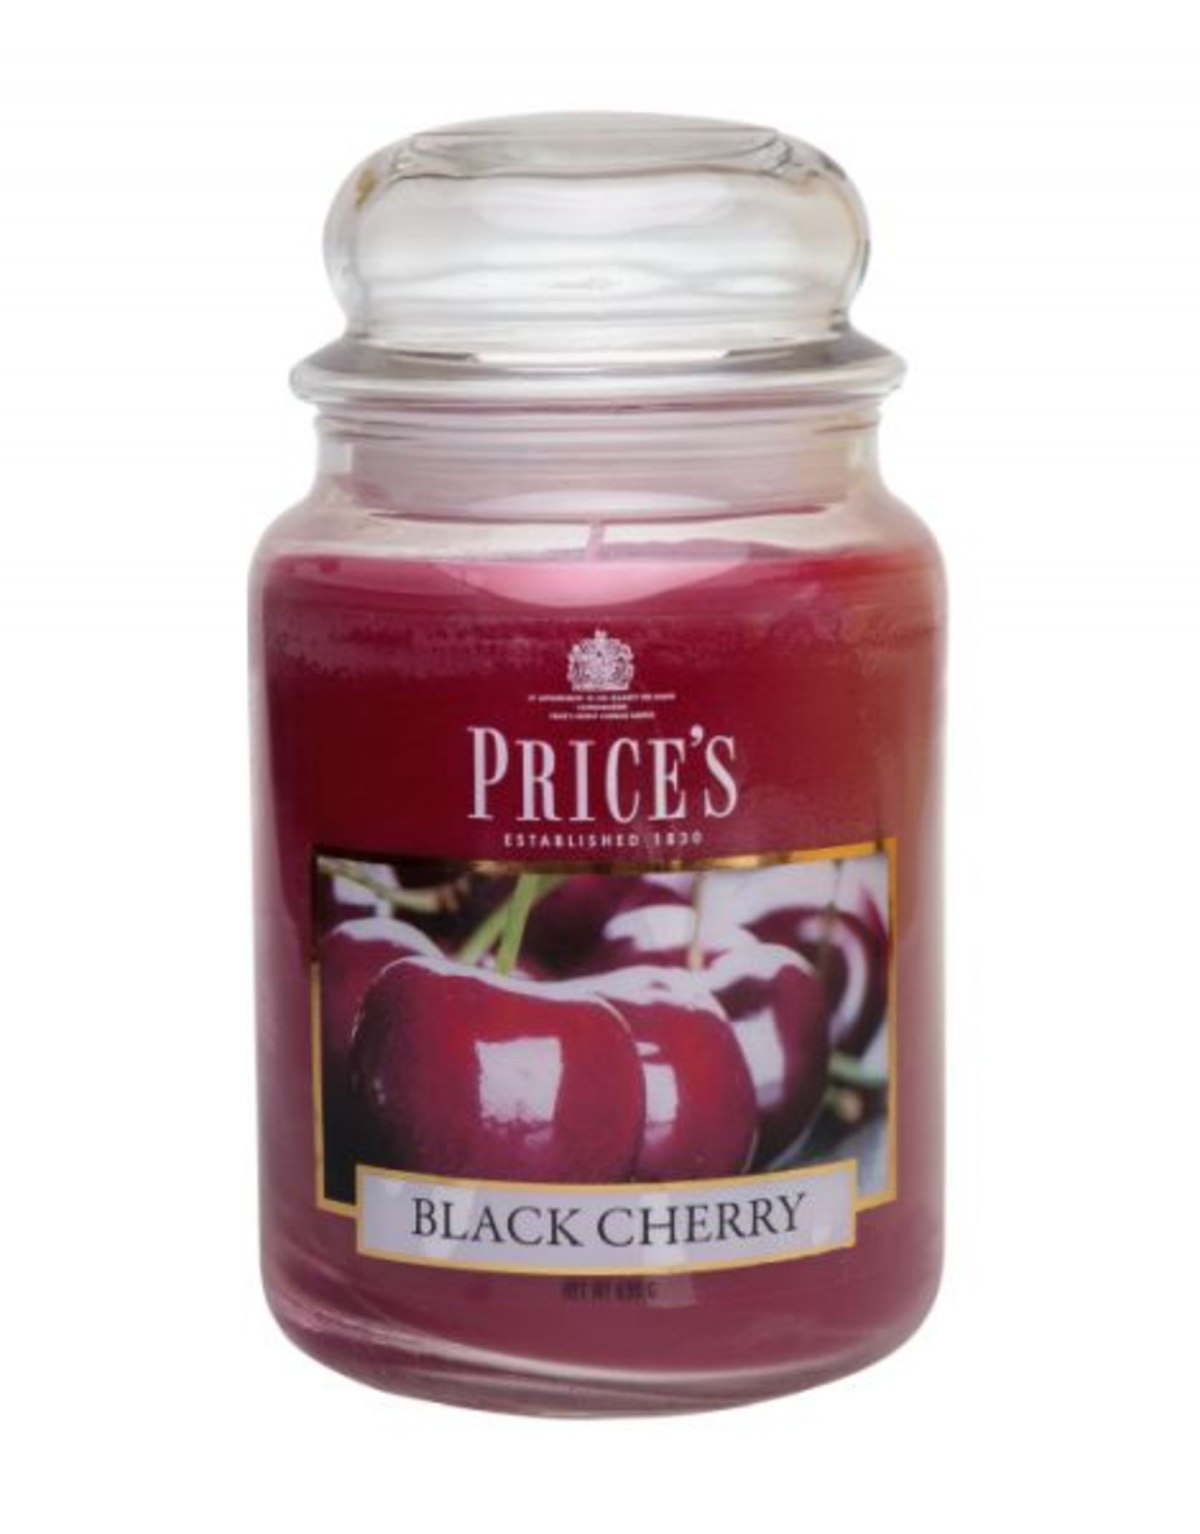 Scented Candle in Large Jar...